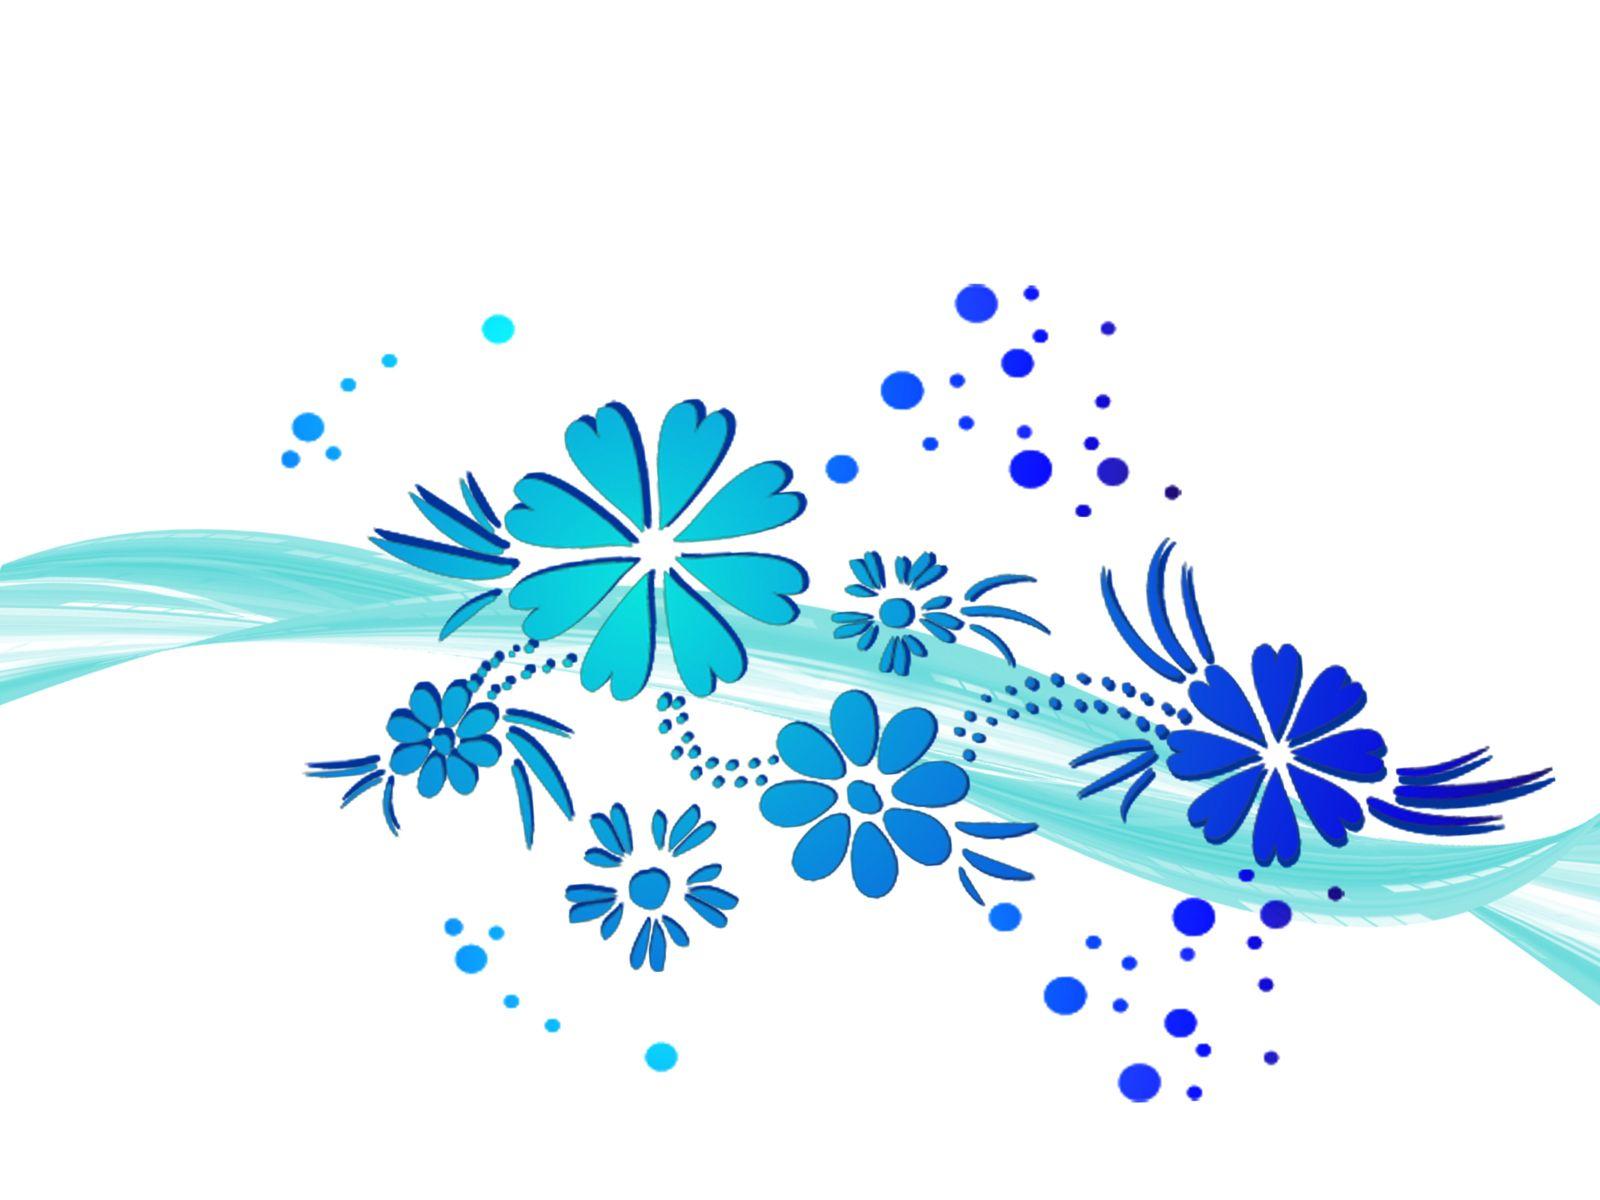 Wawe Blue Flowers Free PPT Background for your PowerPoint